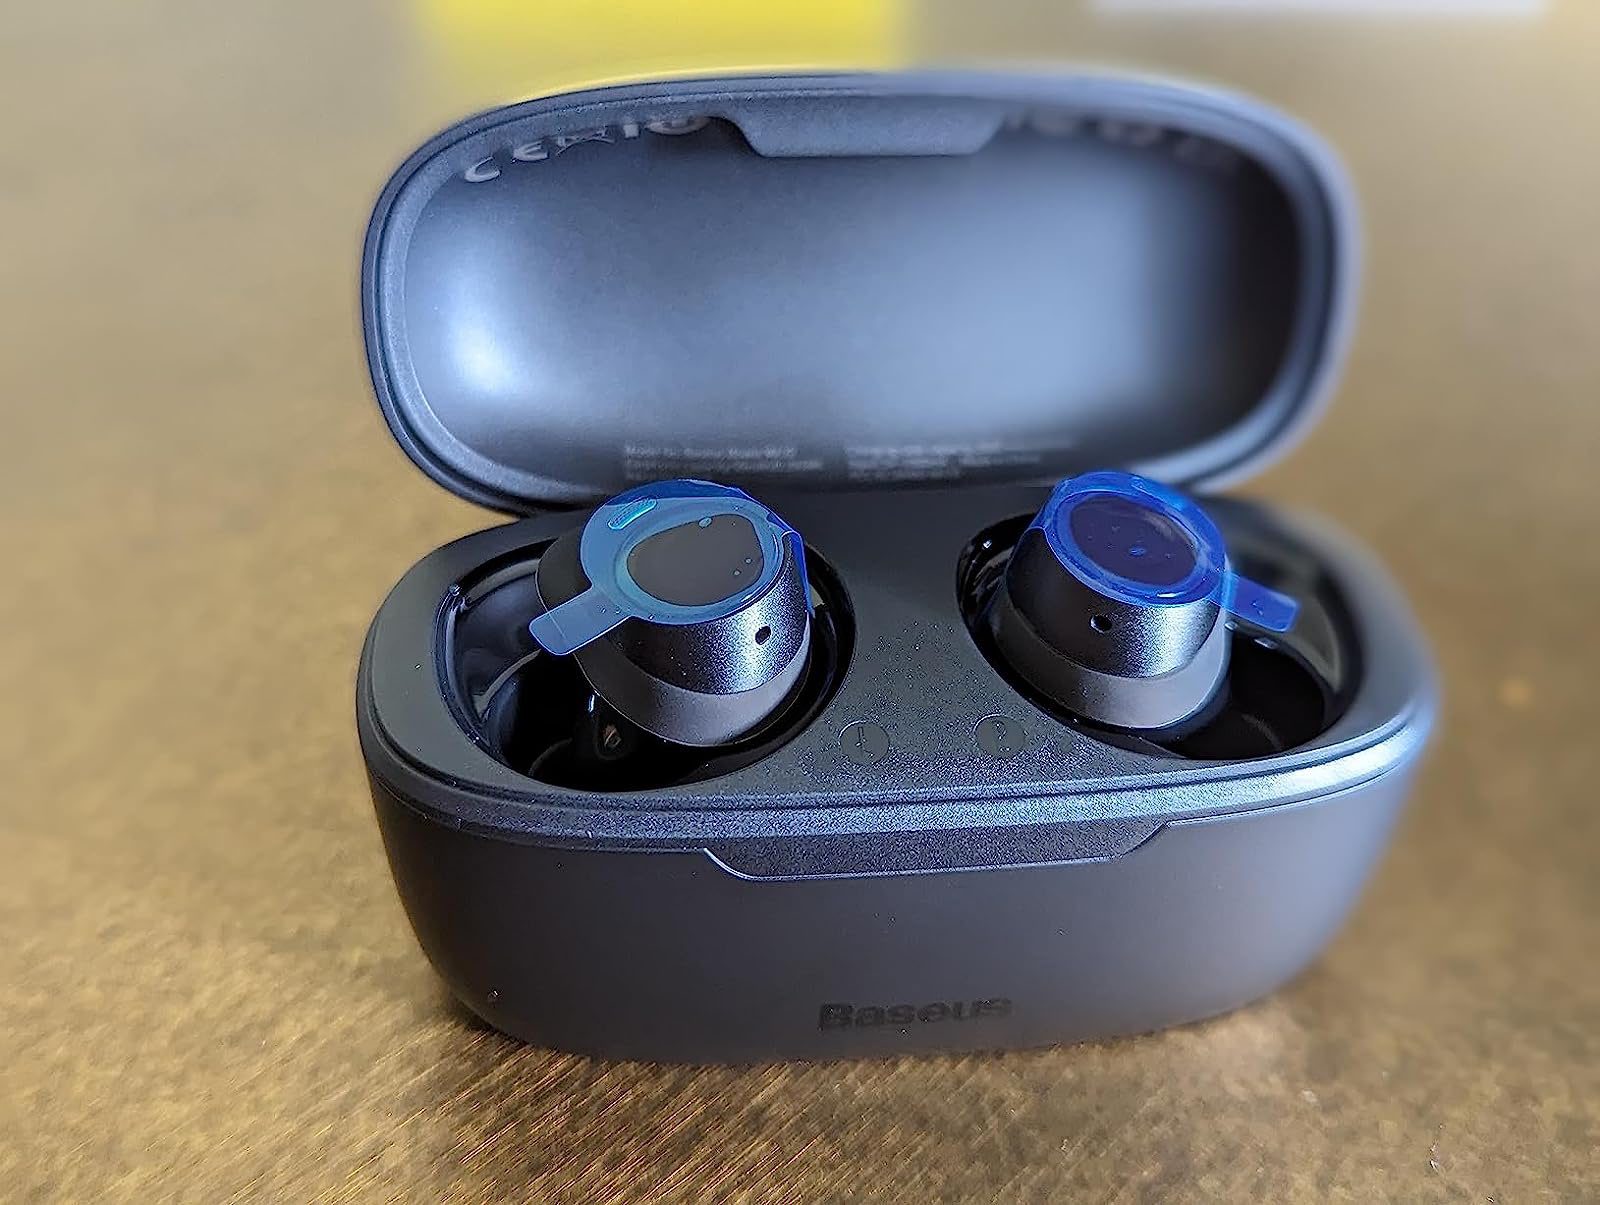 Baseus Bowie MA10 Review : New Earbuds With The Longest Battery Life